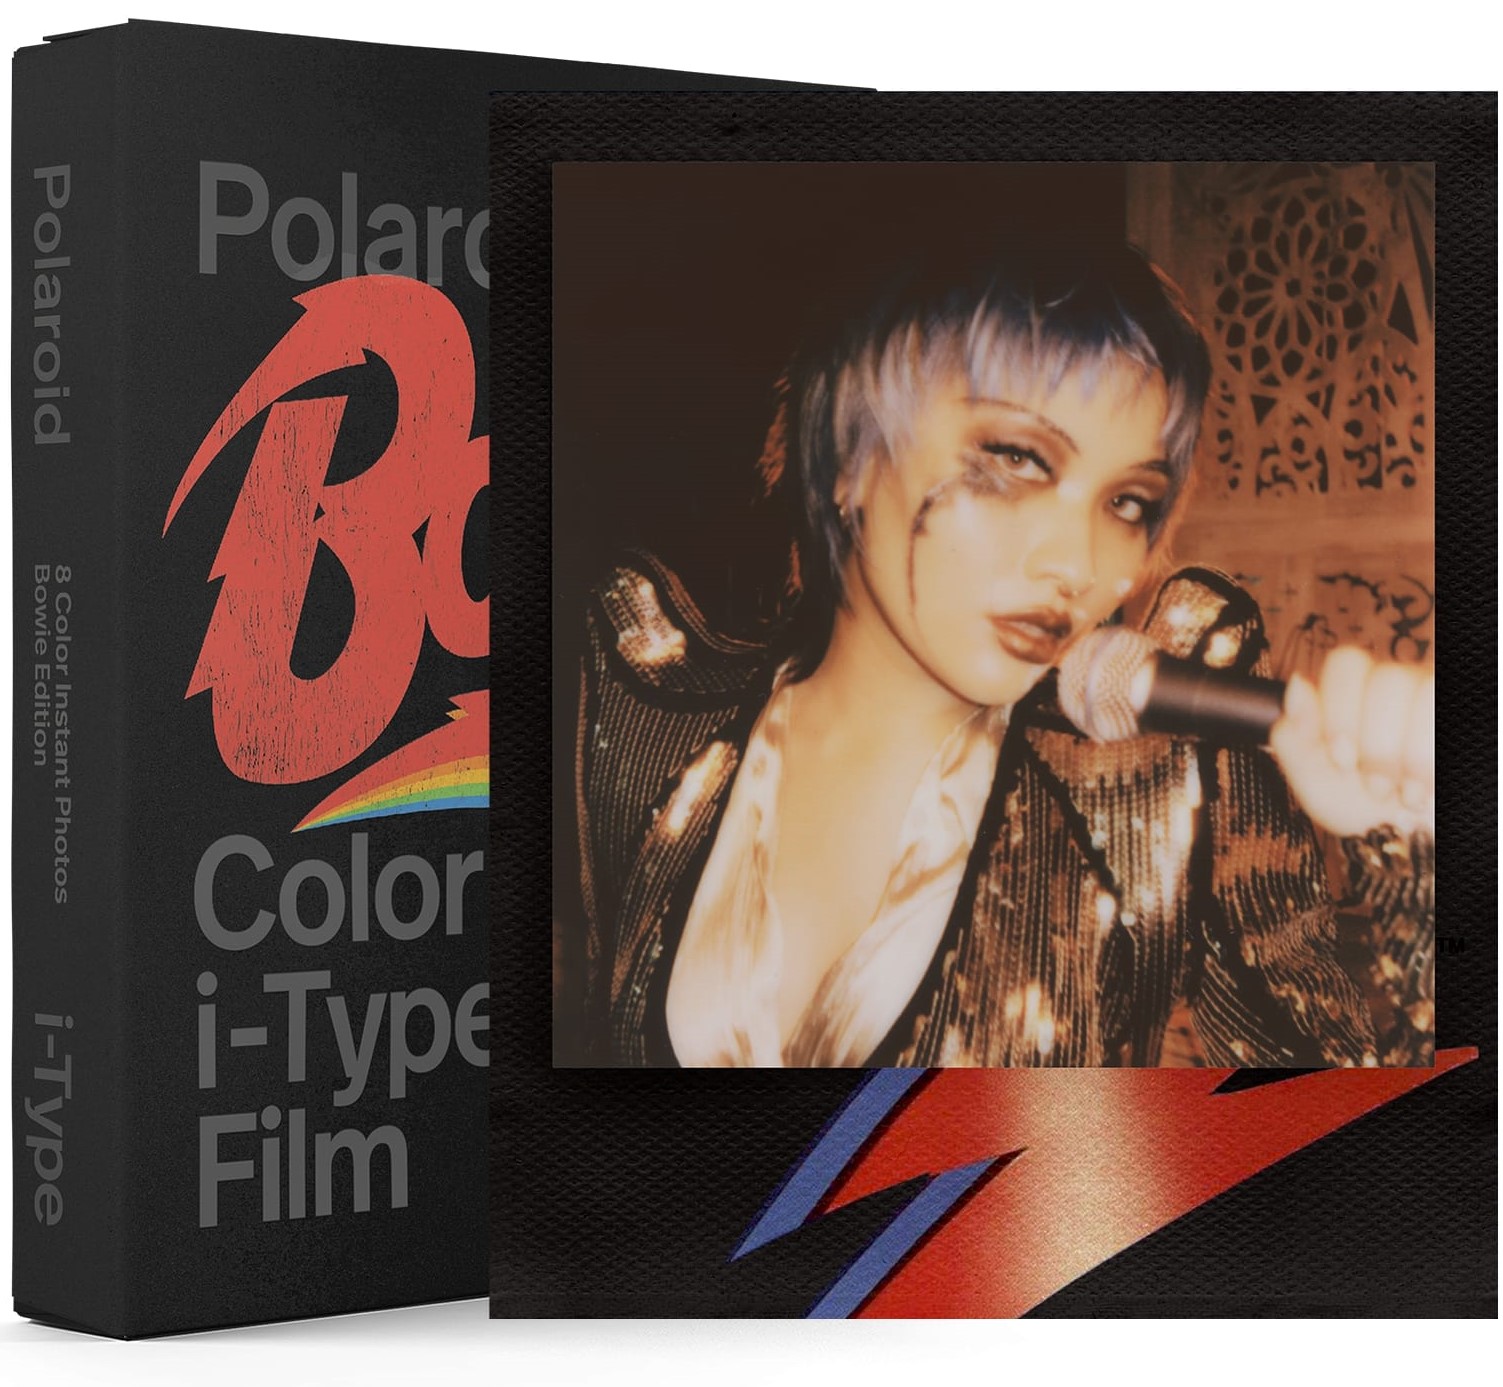     Film Polaroid Color Film for i-Type David Bowie Edition